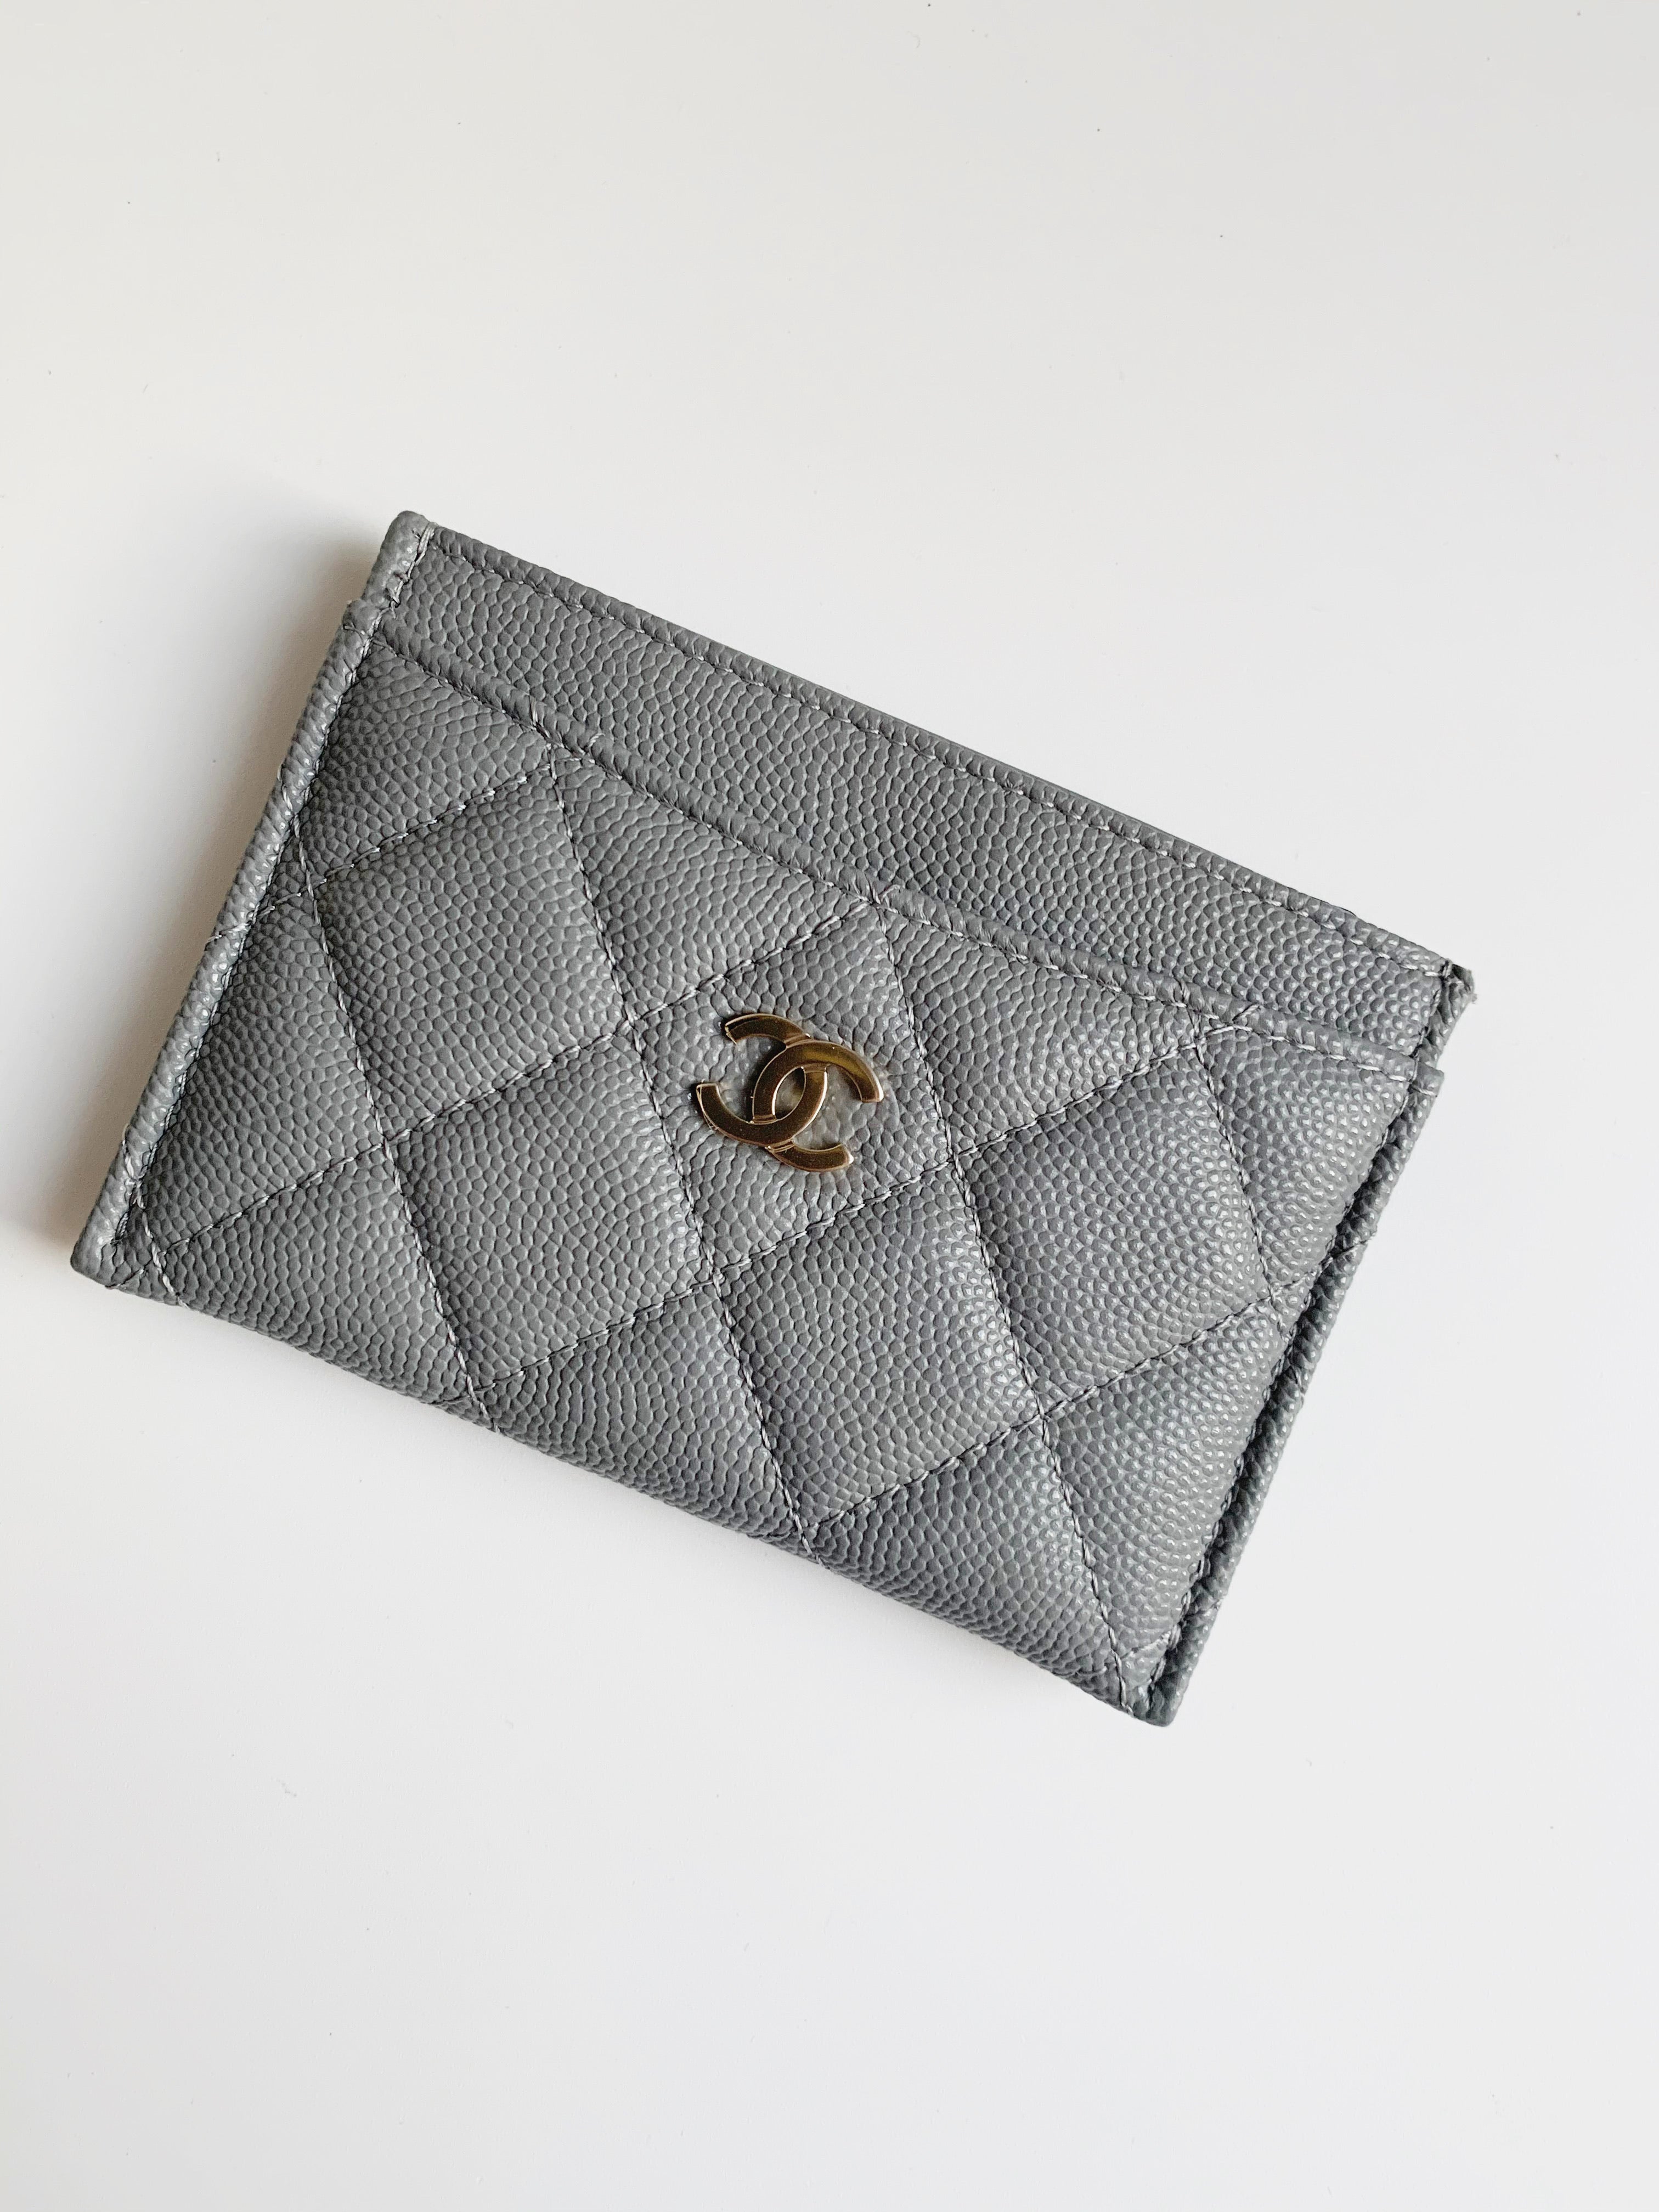 CHANEL Caviar Quilted Flap Card Holder Wallet Grey 781844